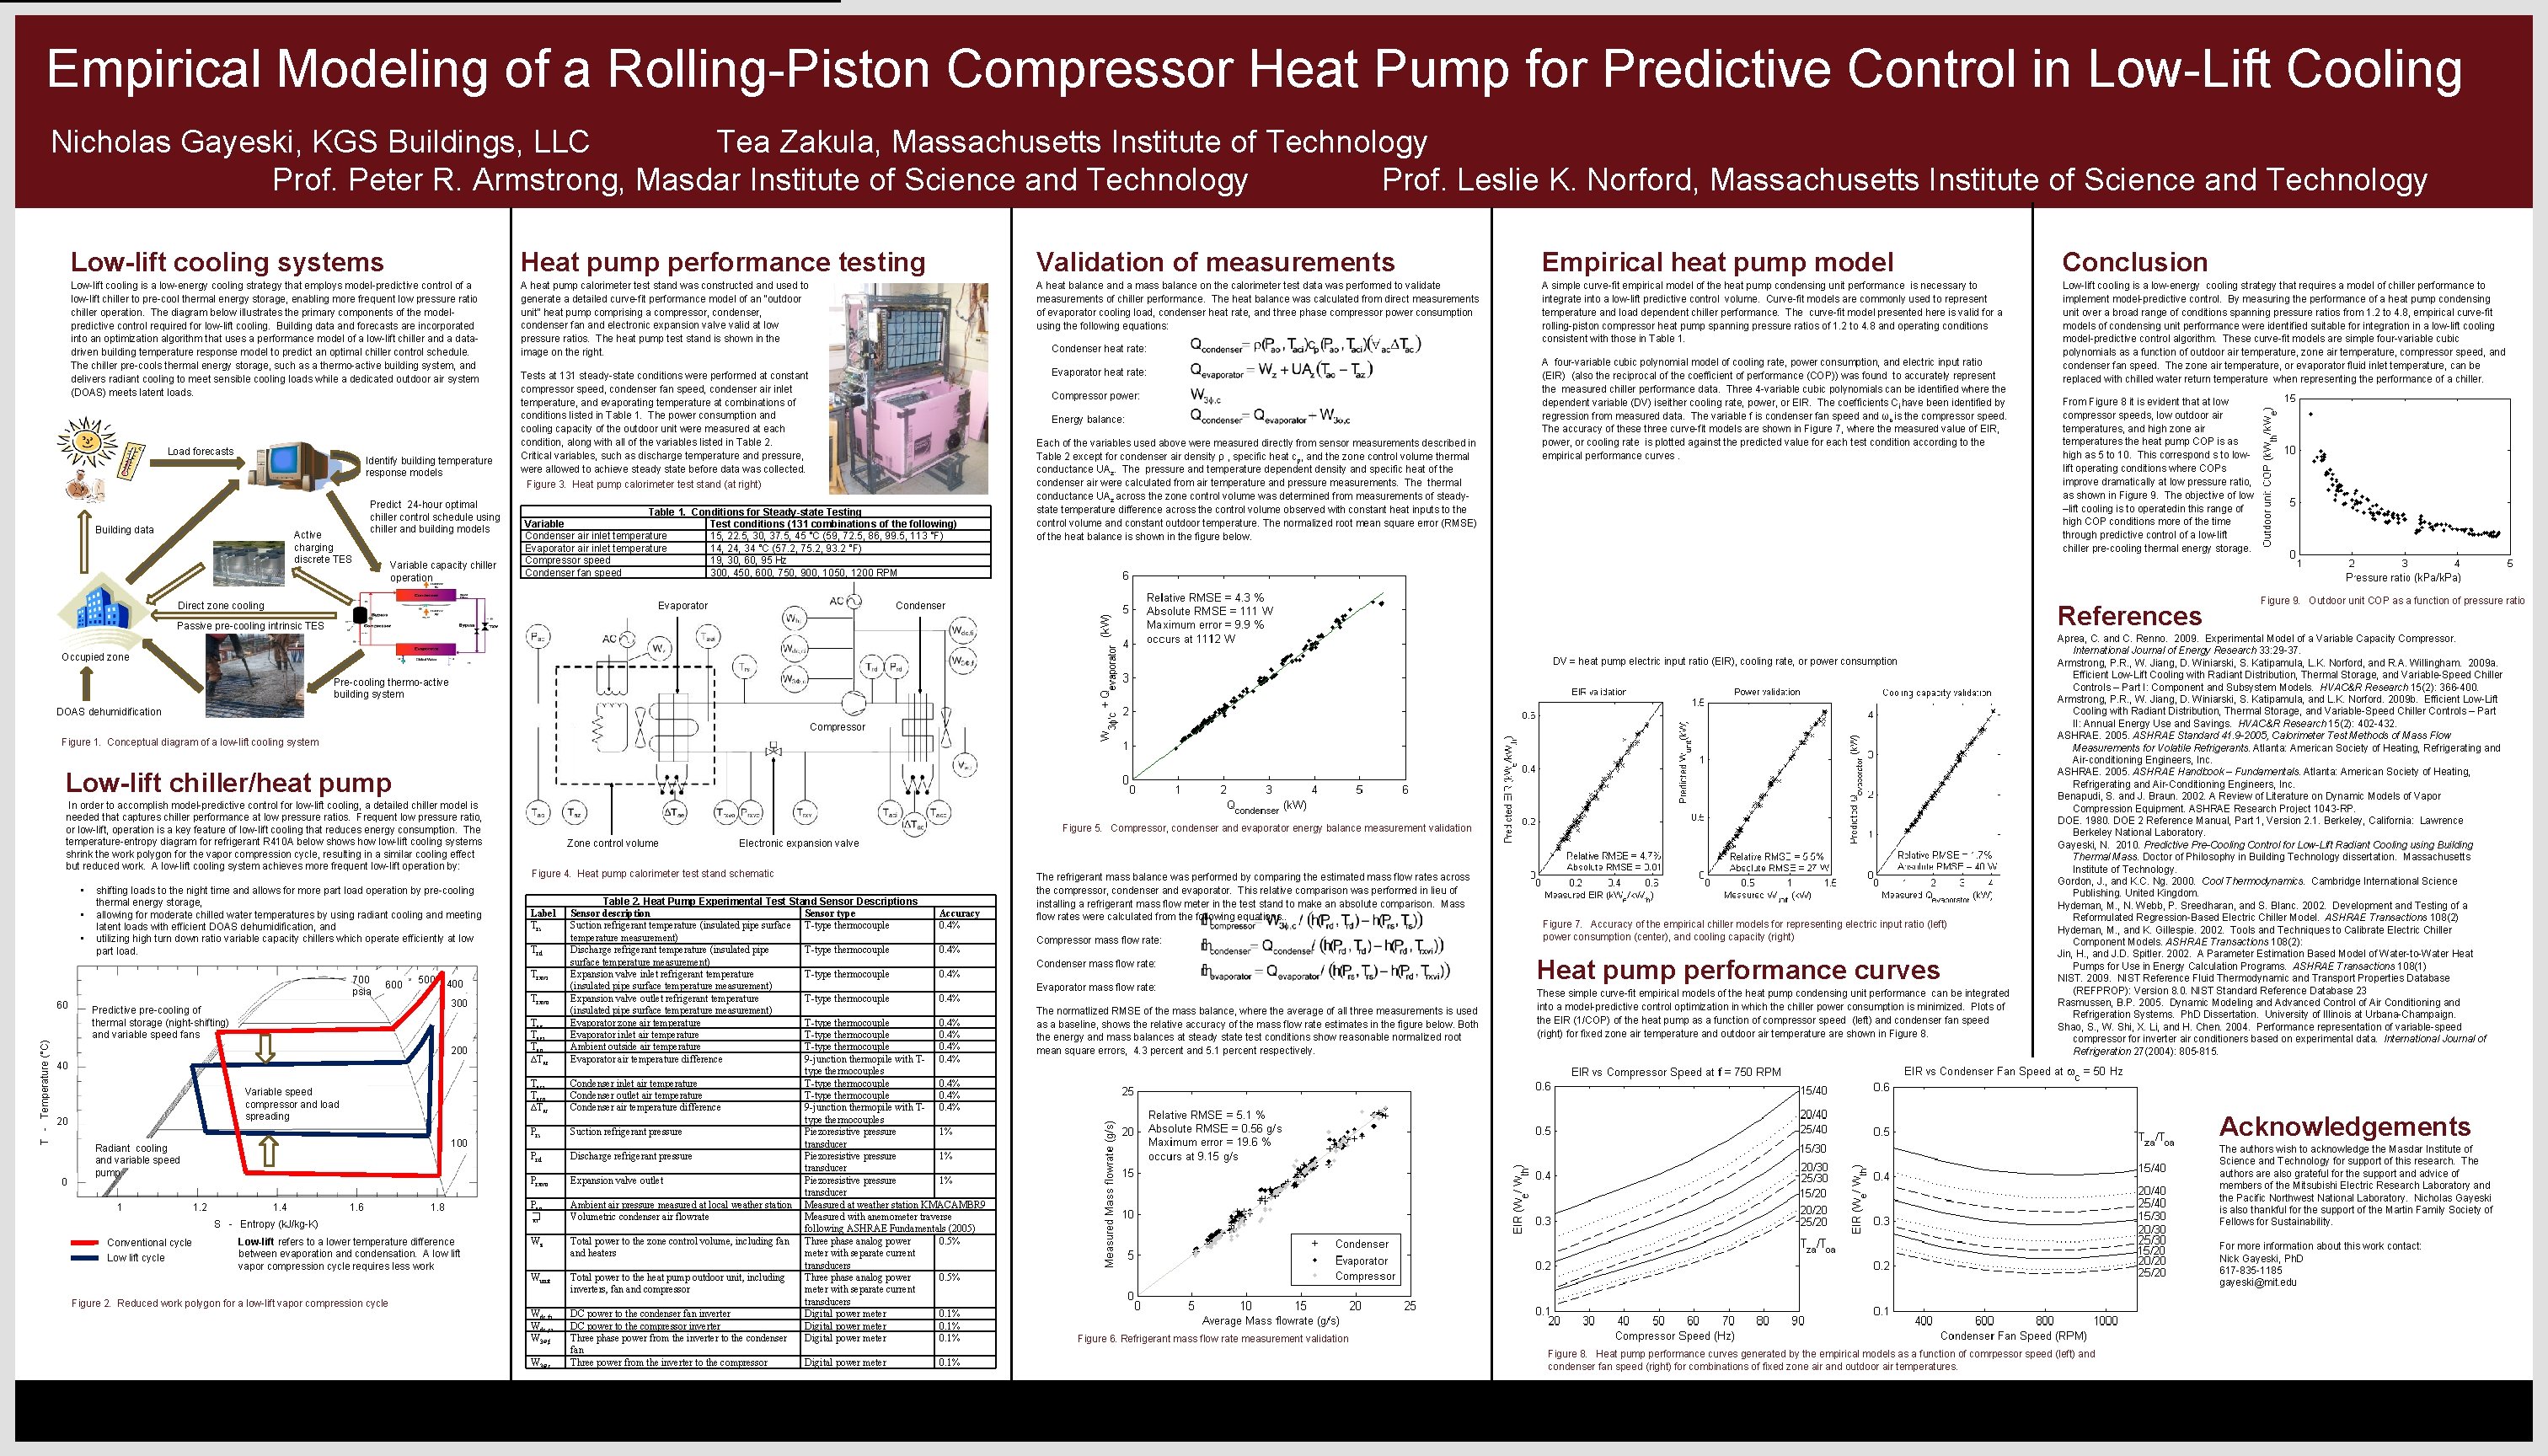 Empirical Modeling of a Rolling-Piston Compressor Heat Pump for Predictive Control in Low-Lift Cooling